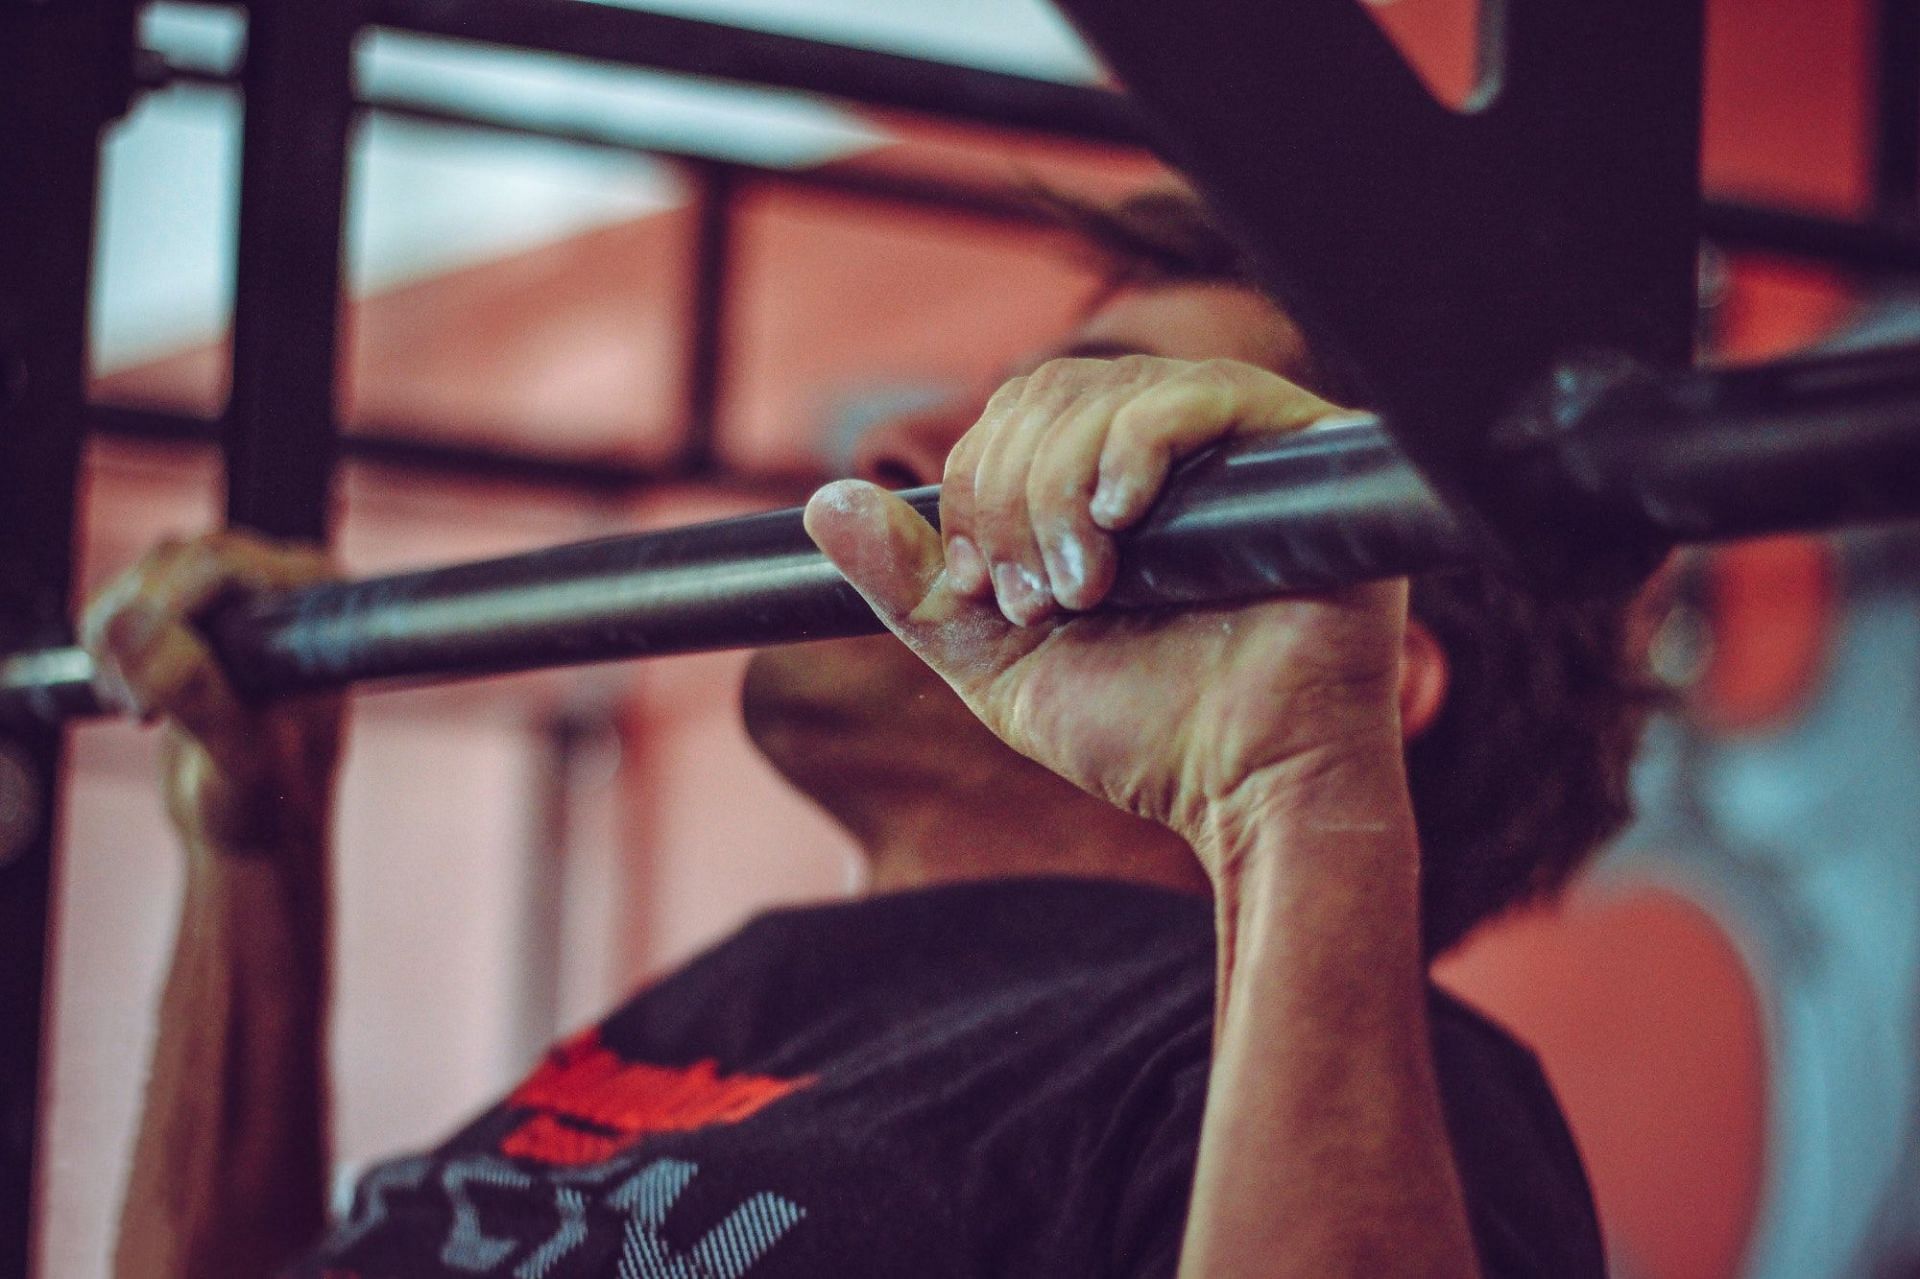 Grip strength exercises will help you improve your lifting strength (Image via Pexels @Victor Freitas)